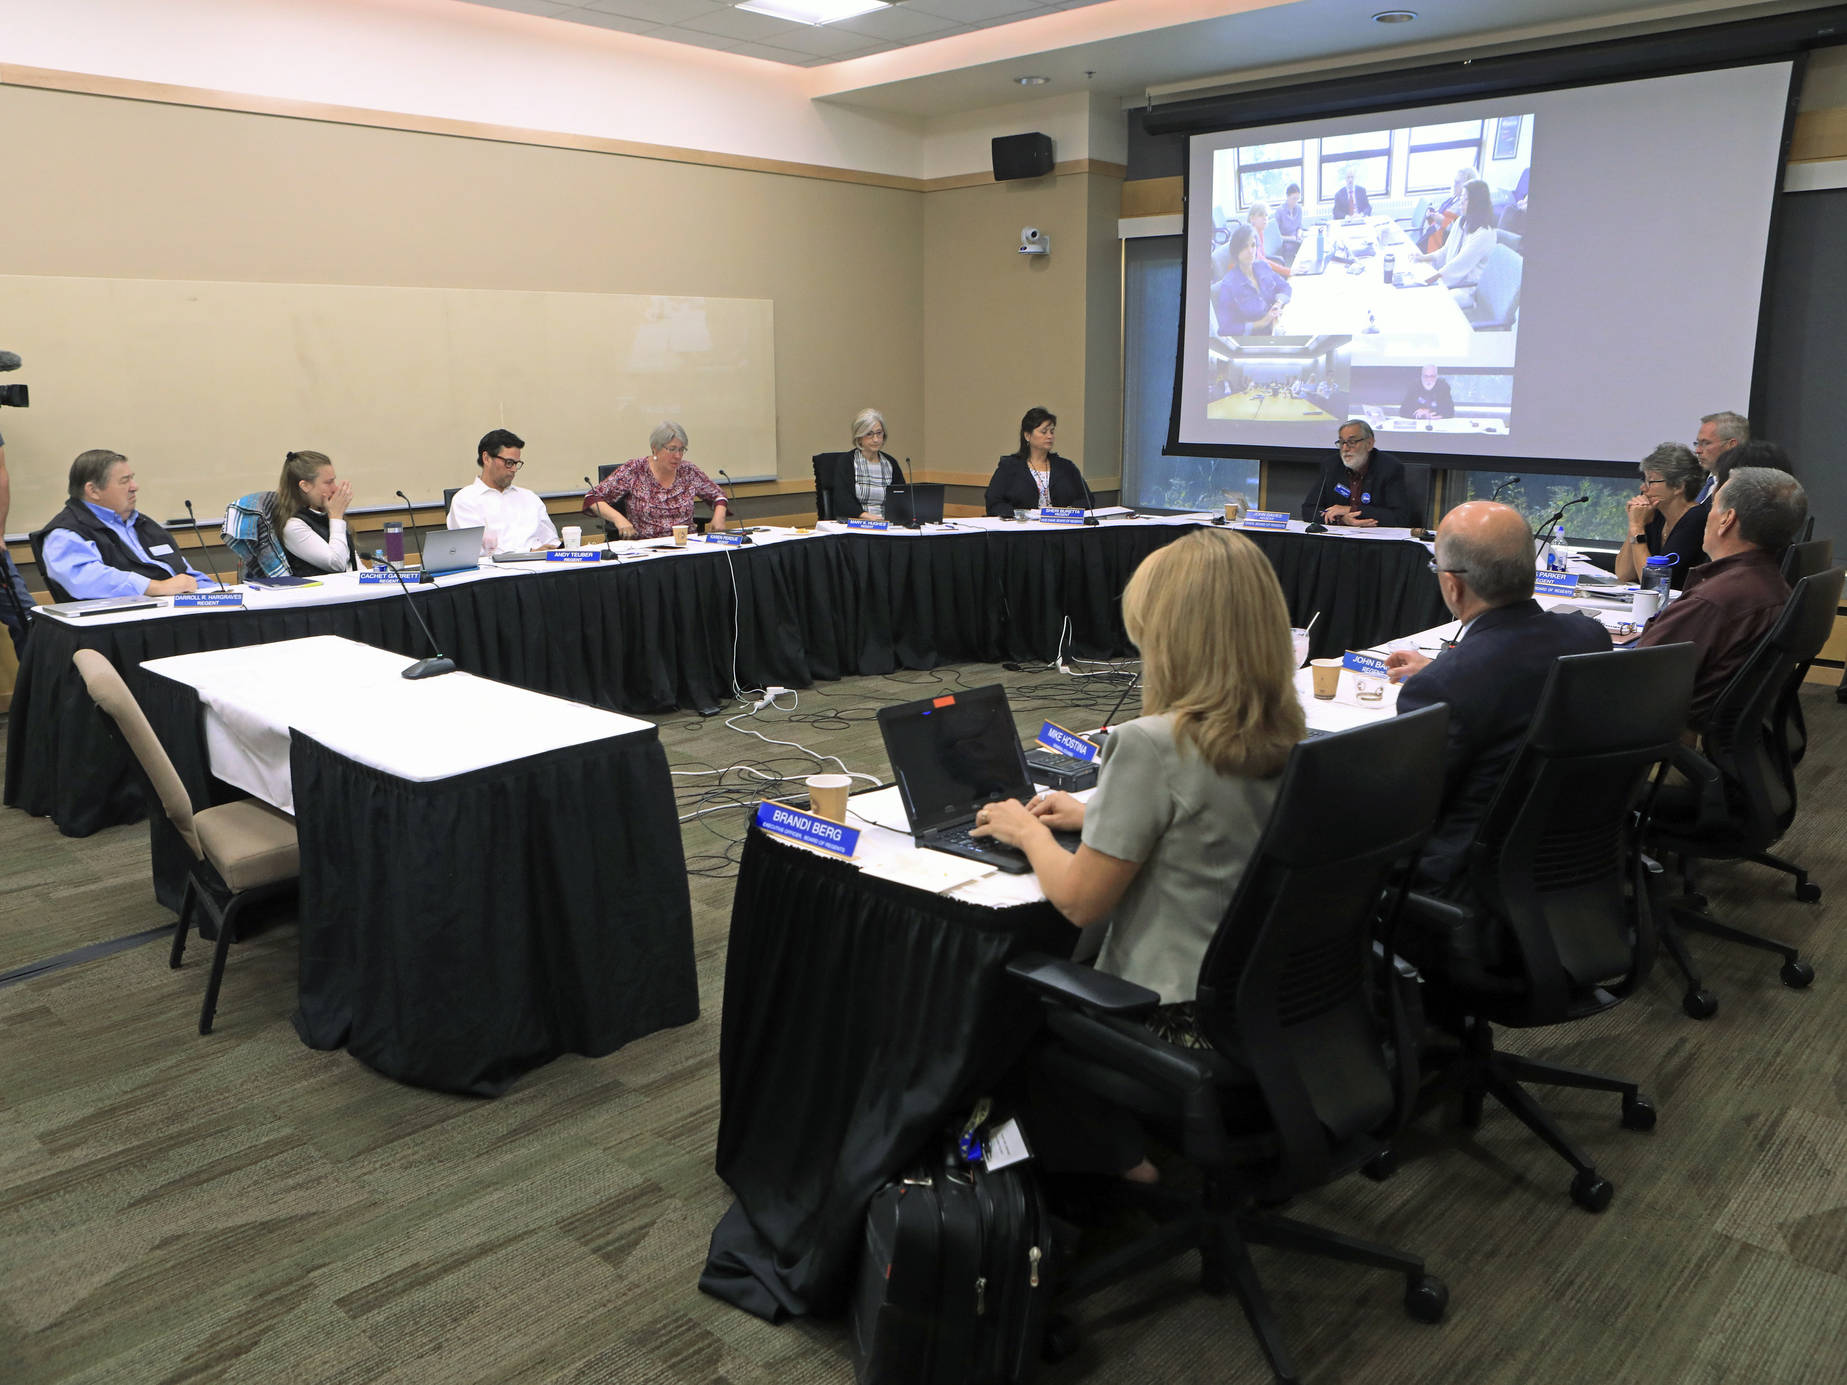 The University of Alaska Board of Regents meets in an emergency meeting in Anchorage, Alaska Monday, July 22, 2019. Regents voted 10-1 to declare a financial exigency, allowing administrators to expedite layoffs of tenured faculty in the face of severe budget issues. (AP Photo/Dan Joling)